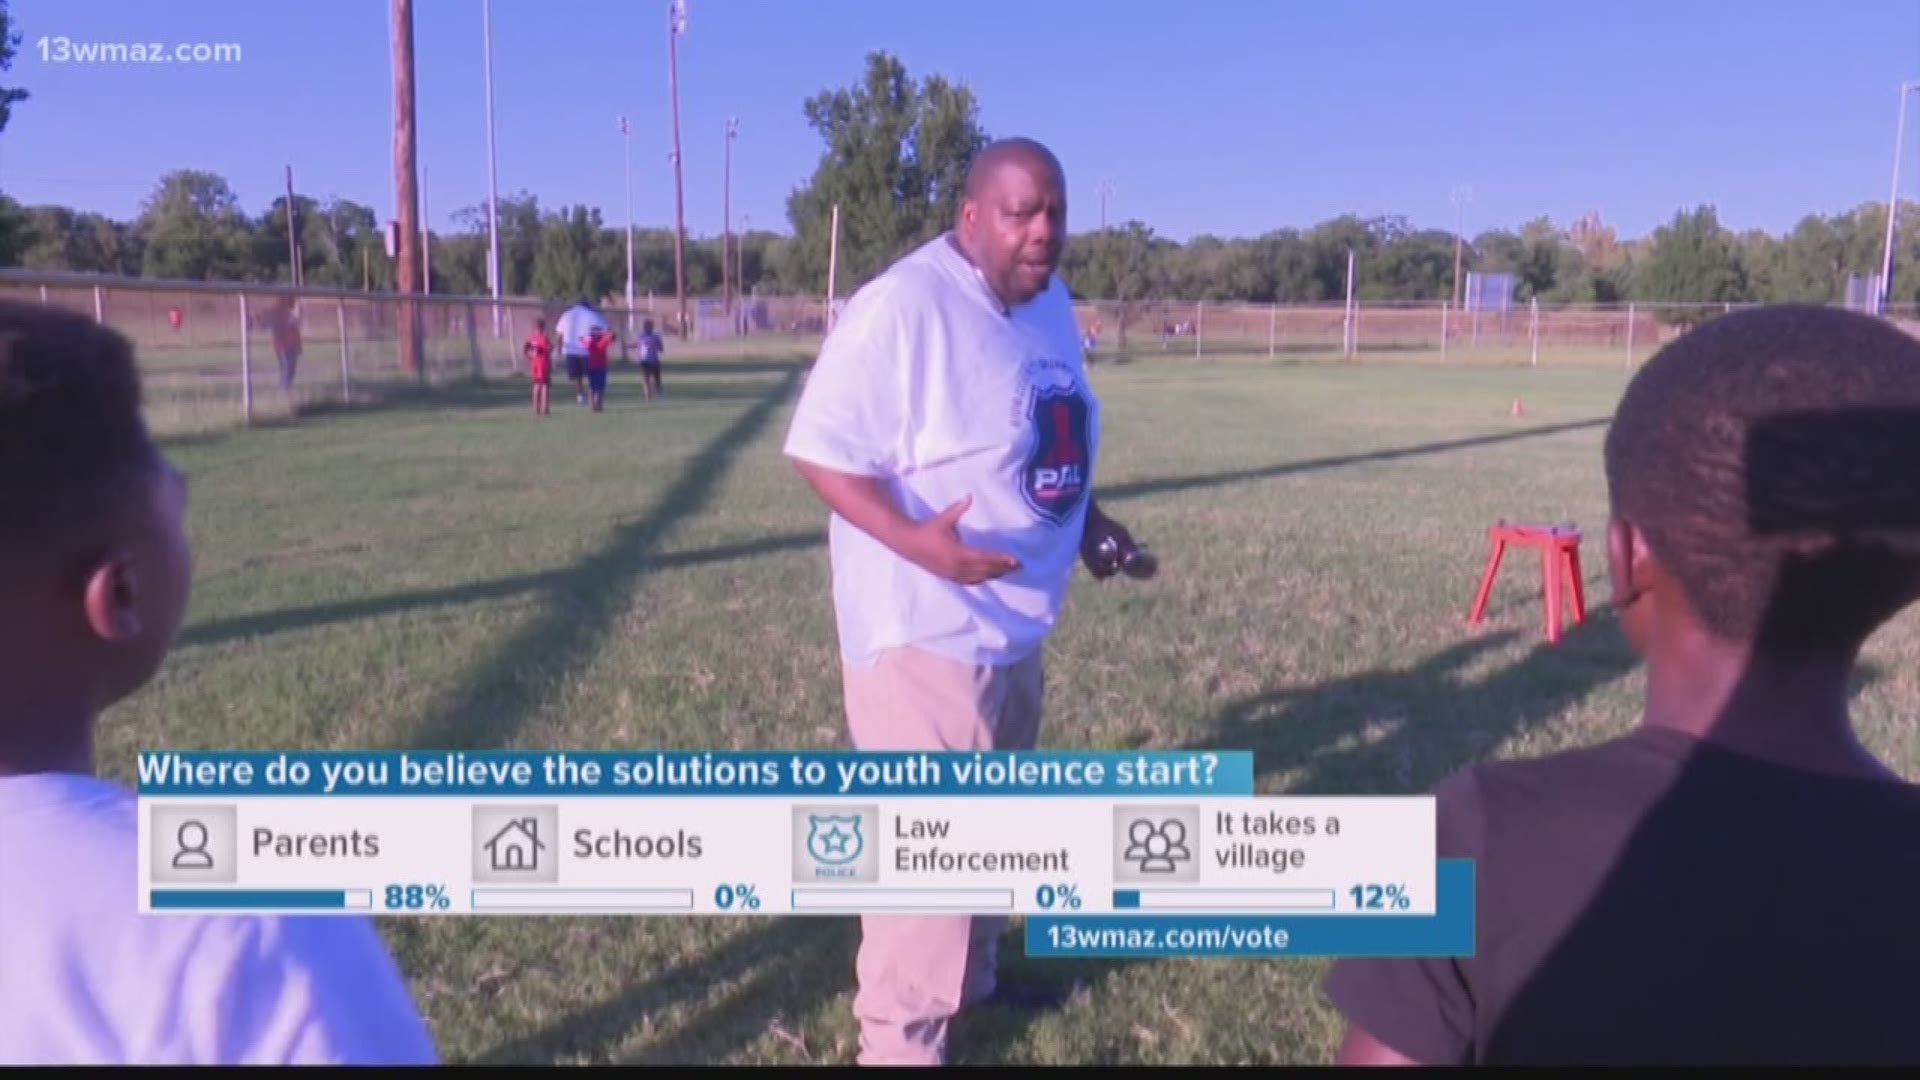 The Youth Recreation League will fill Central City Park with kids and coaches playing ball. One of the people making a difference will be a lieutenant with the Bibb County Sheriff's office. He is putting down his badge, and picking up a football in the hopes of encouraging youth to choose a positive path.